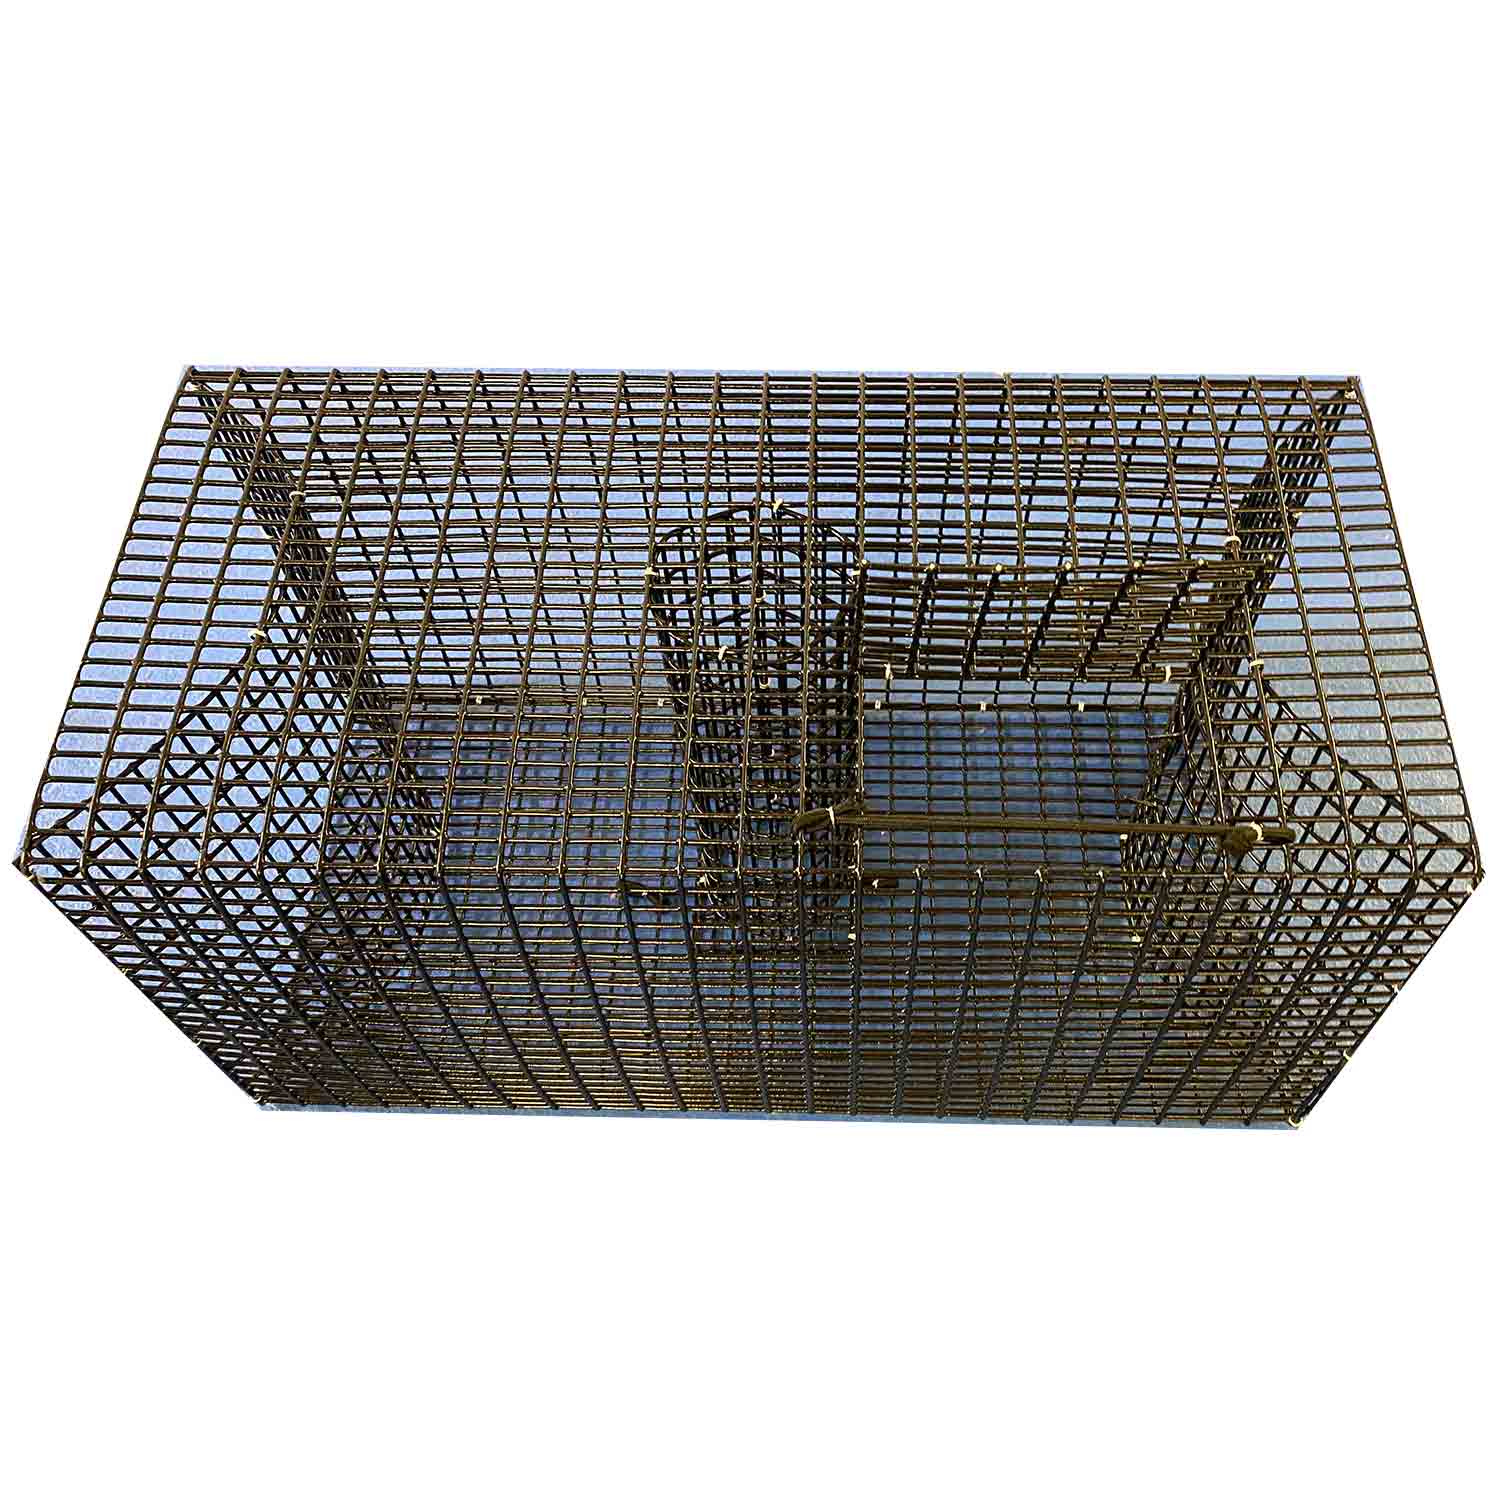 Set of 2 - Collapsible Mesh Crayfish Trap, Zipped Access and Bait